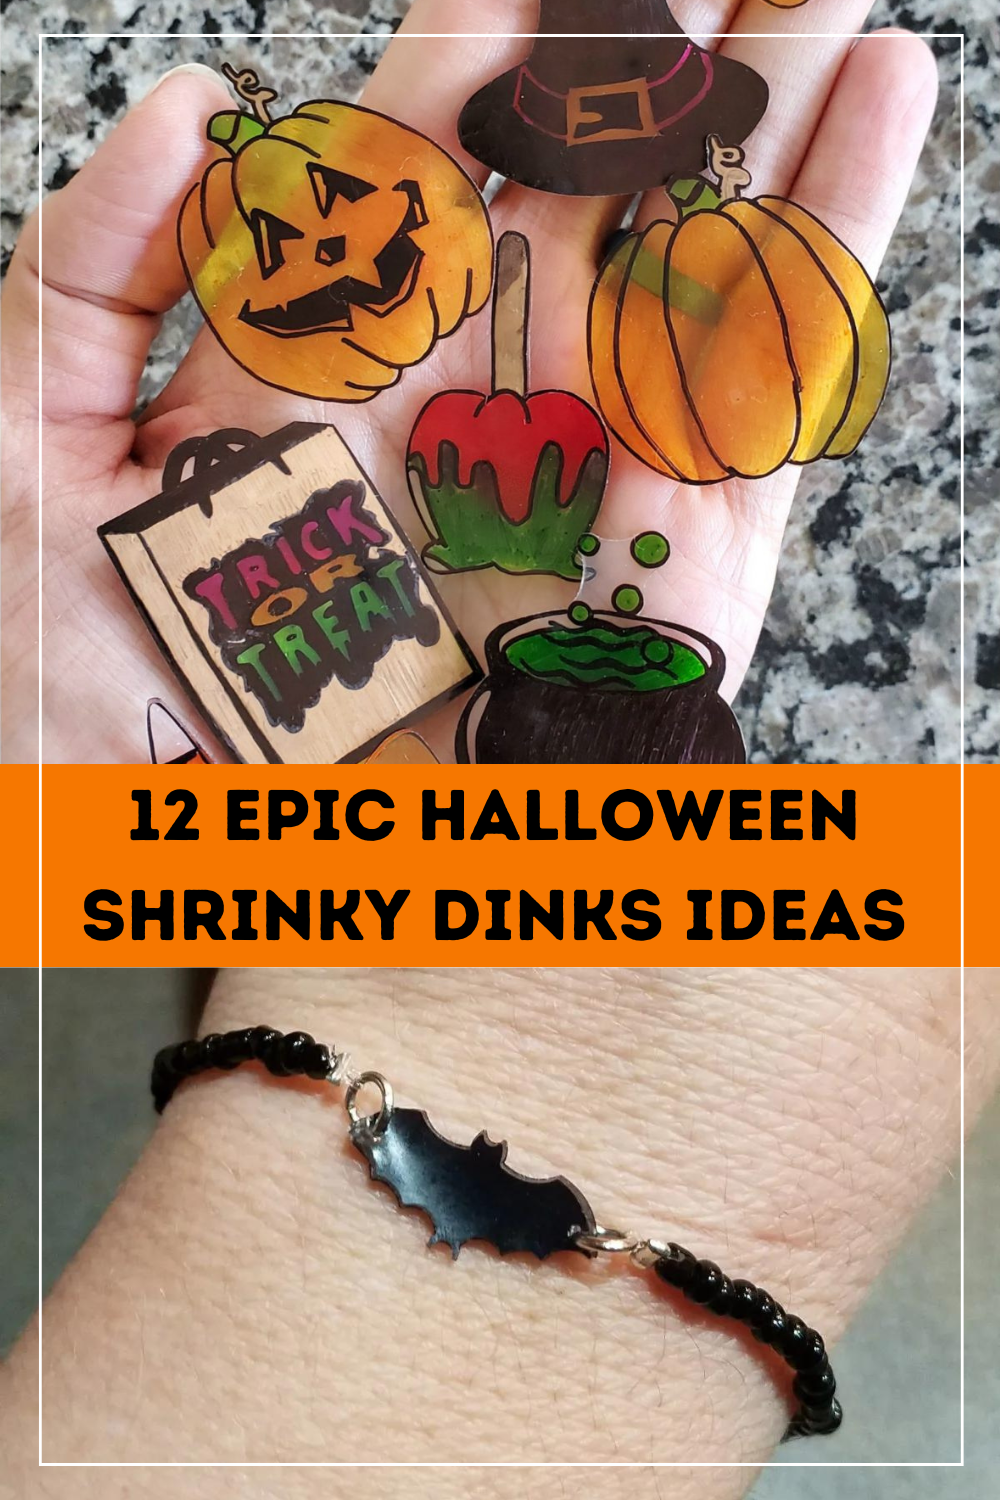 2 photos - one of a hand holding multiple halloween themed shrink art cut outs, the other with a black bat bracelet. Text reads 12 epic halloween shrinky dinks ideas